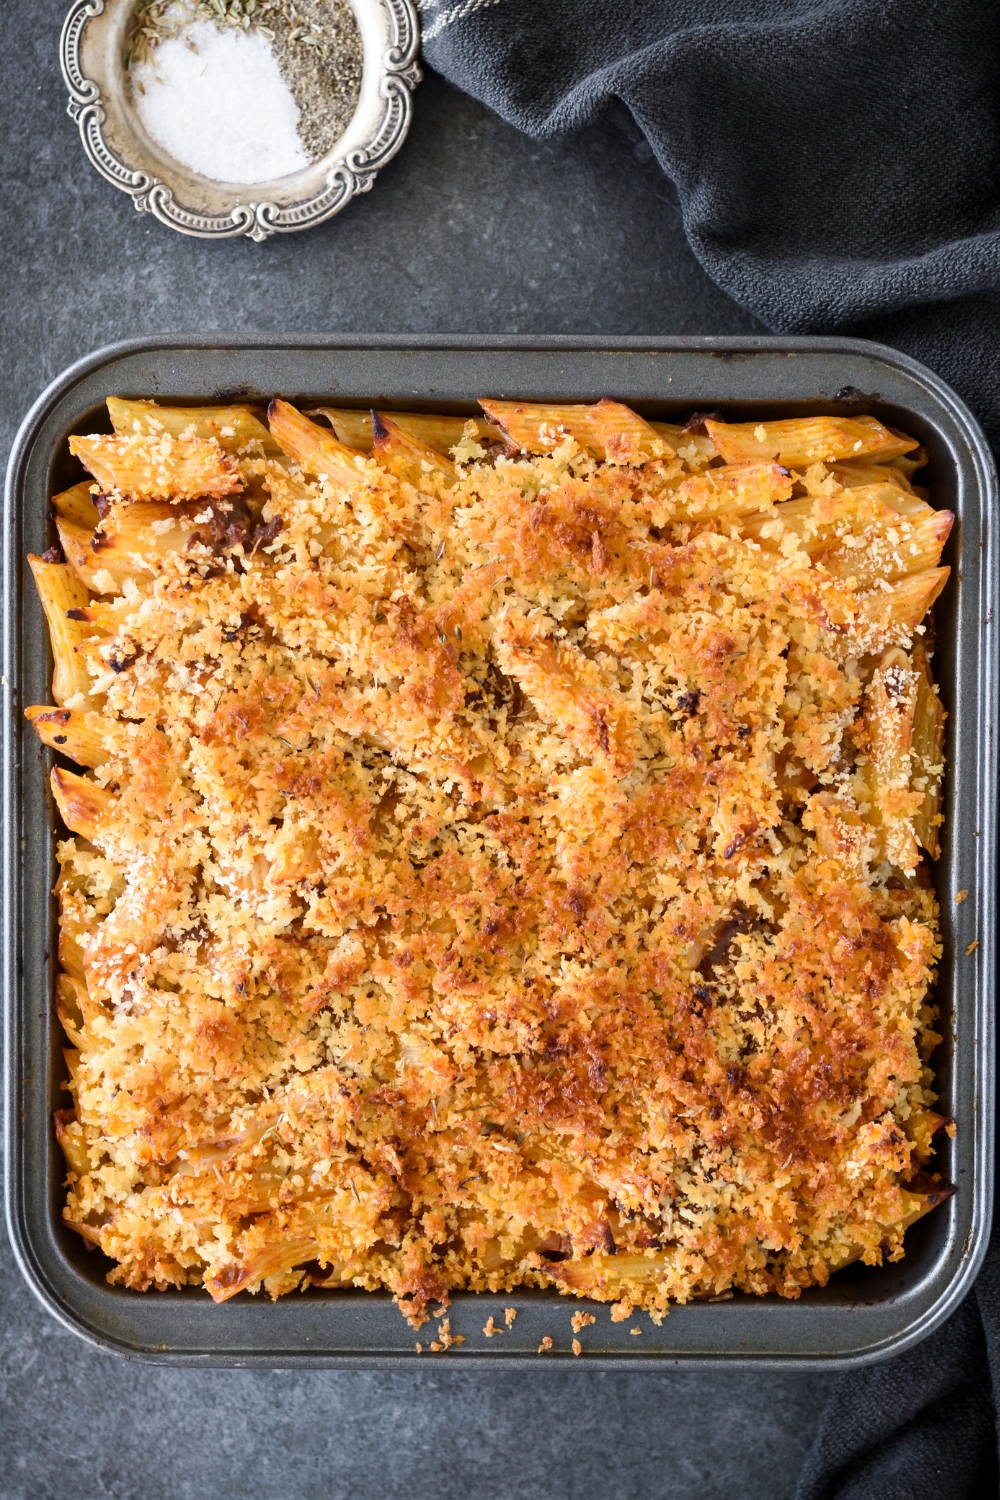 A square baking dish filled with freshly baked Italian casserole covered in golden brown bread crumbs.